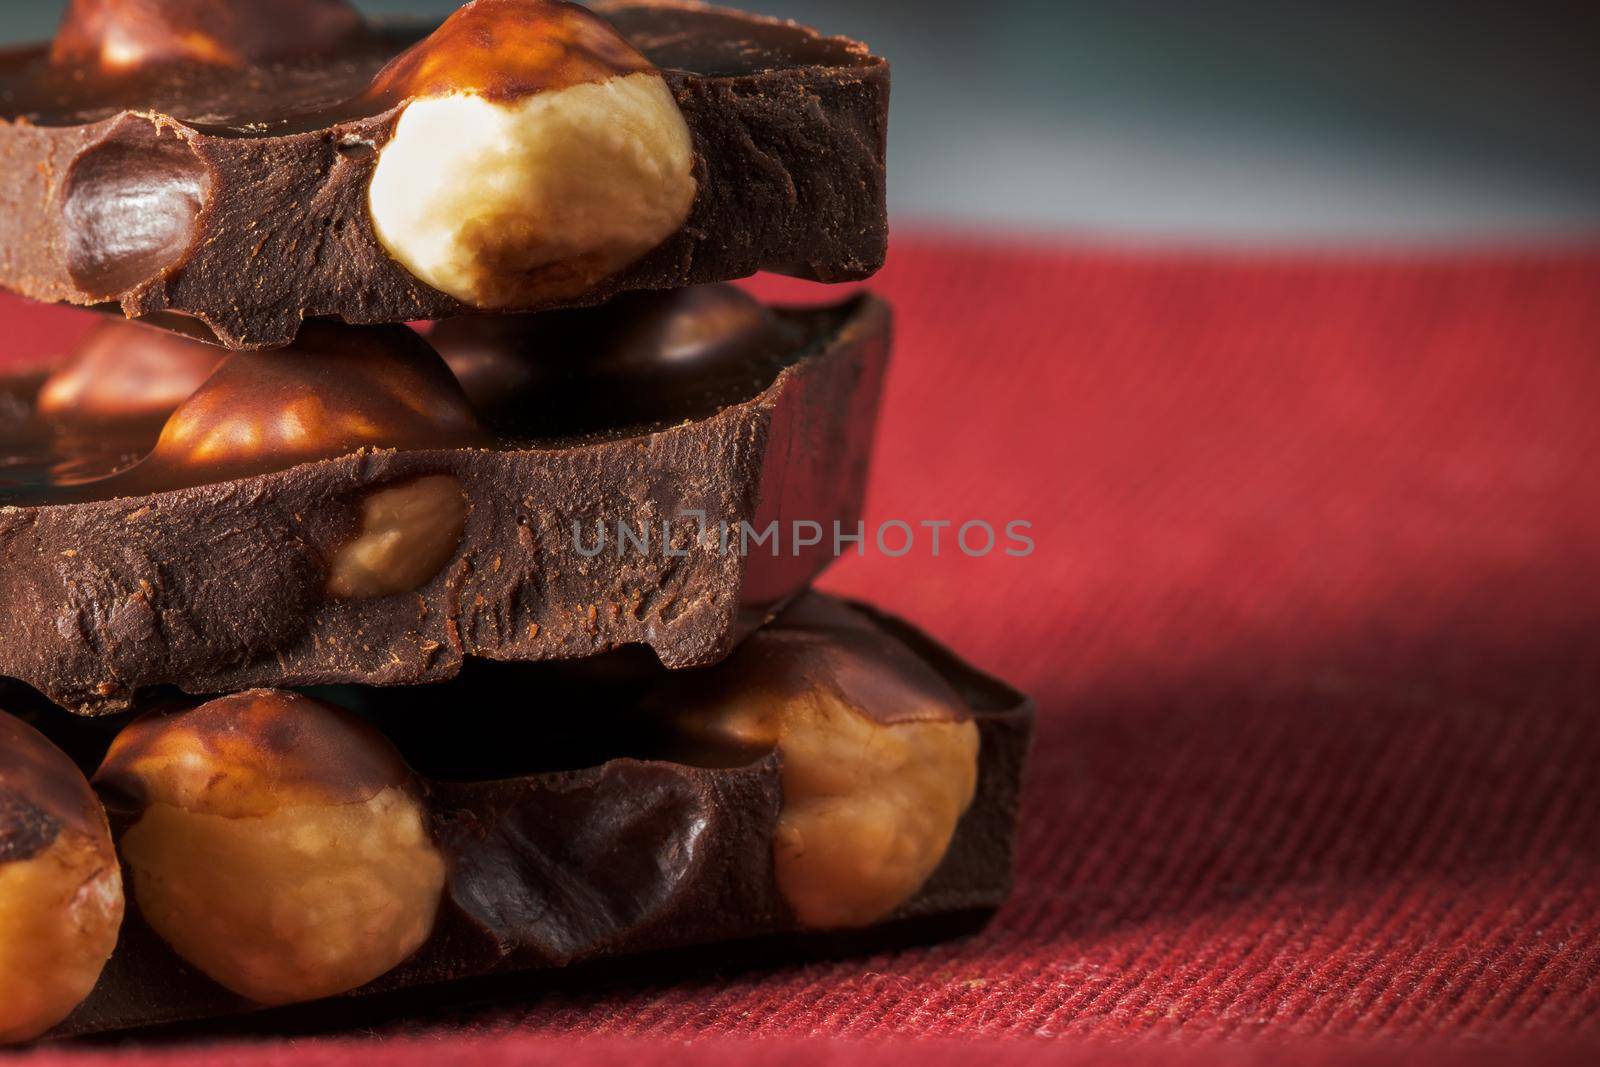 Slices of natural black chocolate with hazelnuts on a red napkin. Close-up macro view